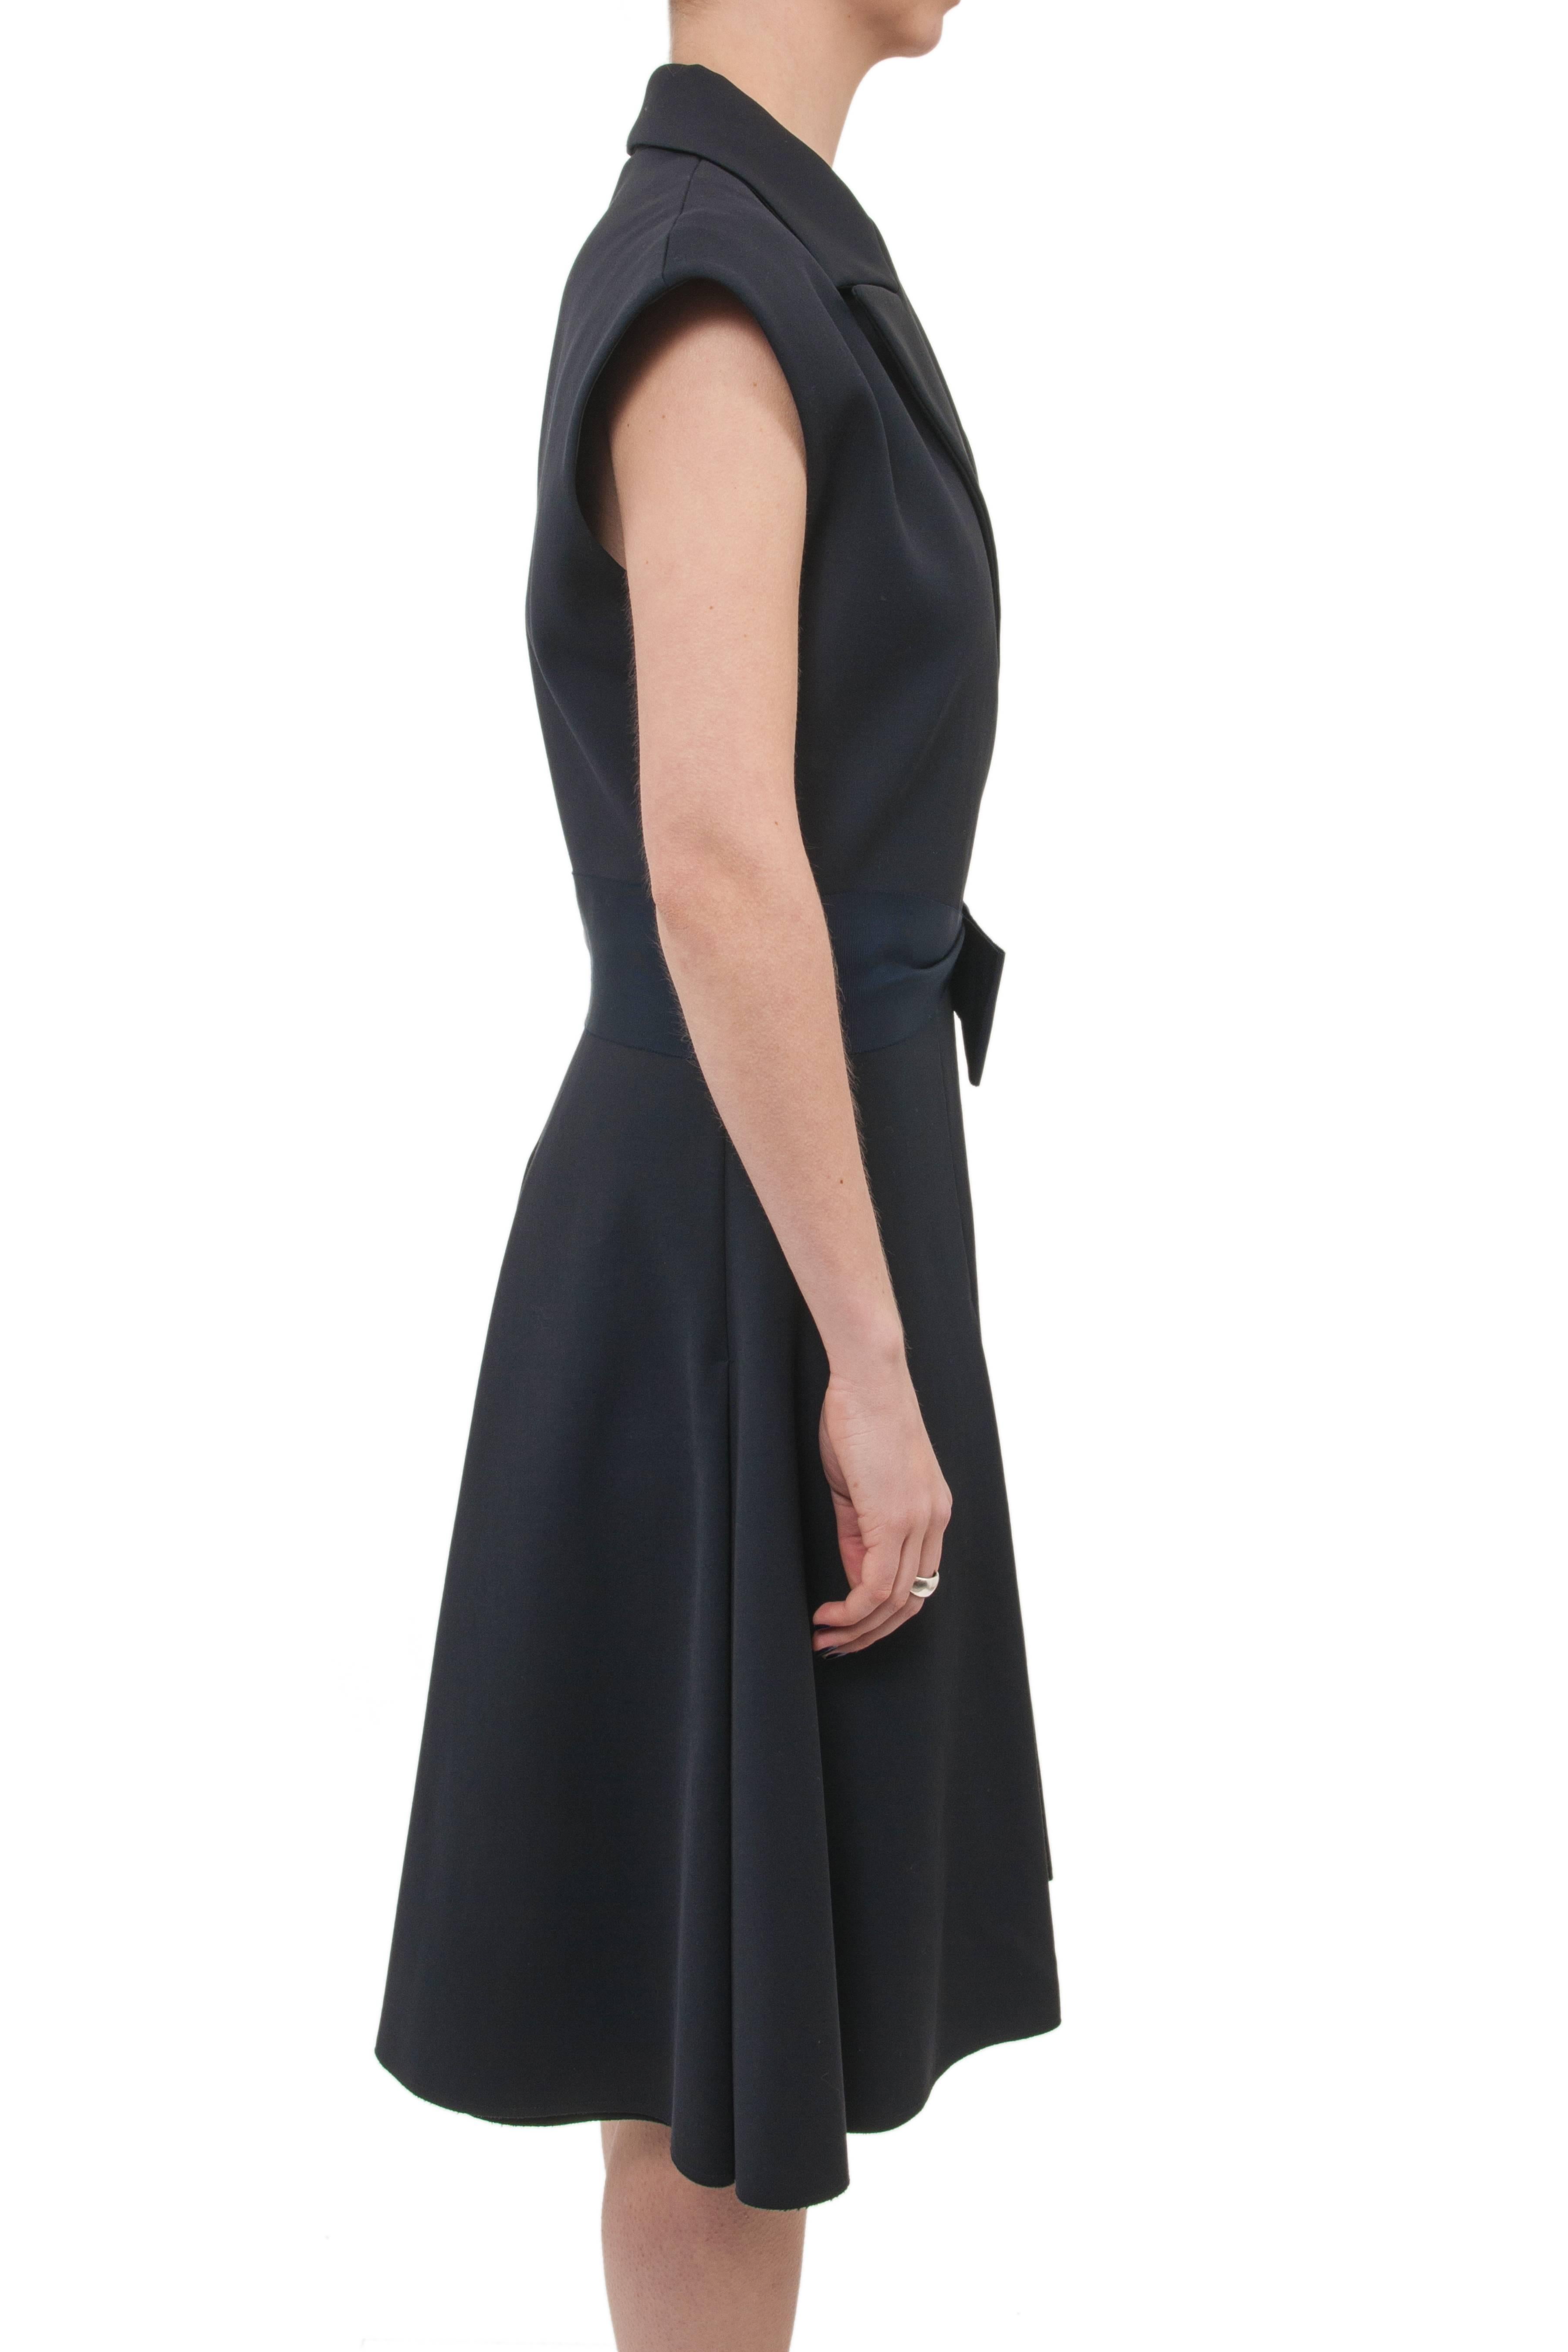 Lanvin Spring 2013 navy tuxedo style dress.  Fitted vest-style bodice and waist with semi-full pleated a-line skirt.  Notched collar, wide grosgrain ribbon waist, exposed metal side zipper.  Marked size FR 38 (but will fit USA 8).  35” bust, 28-29”